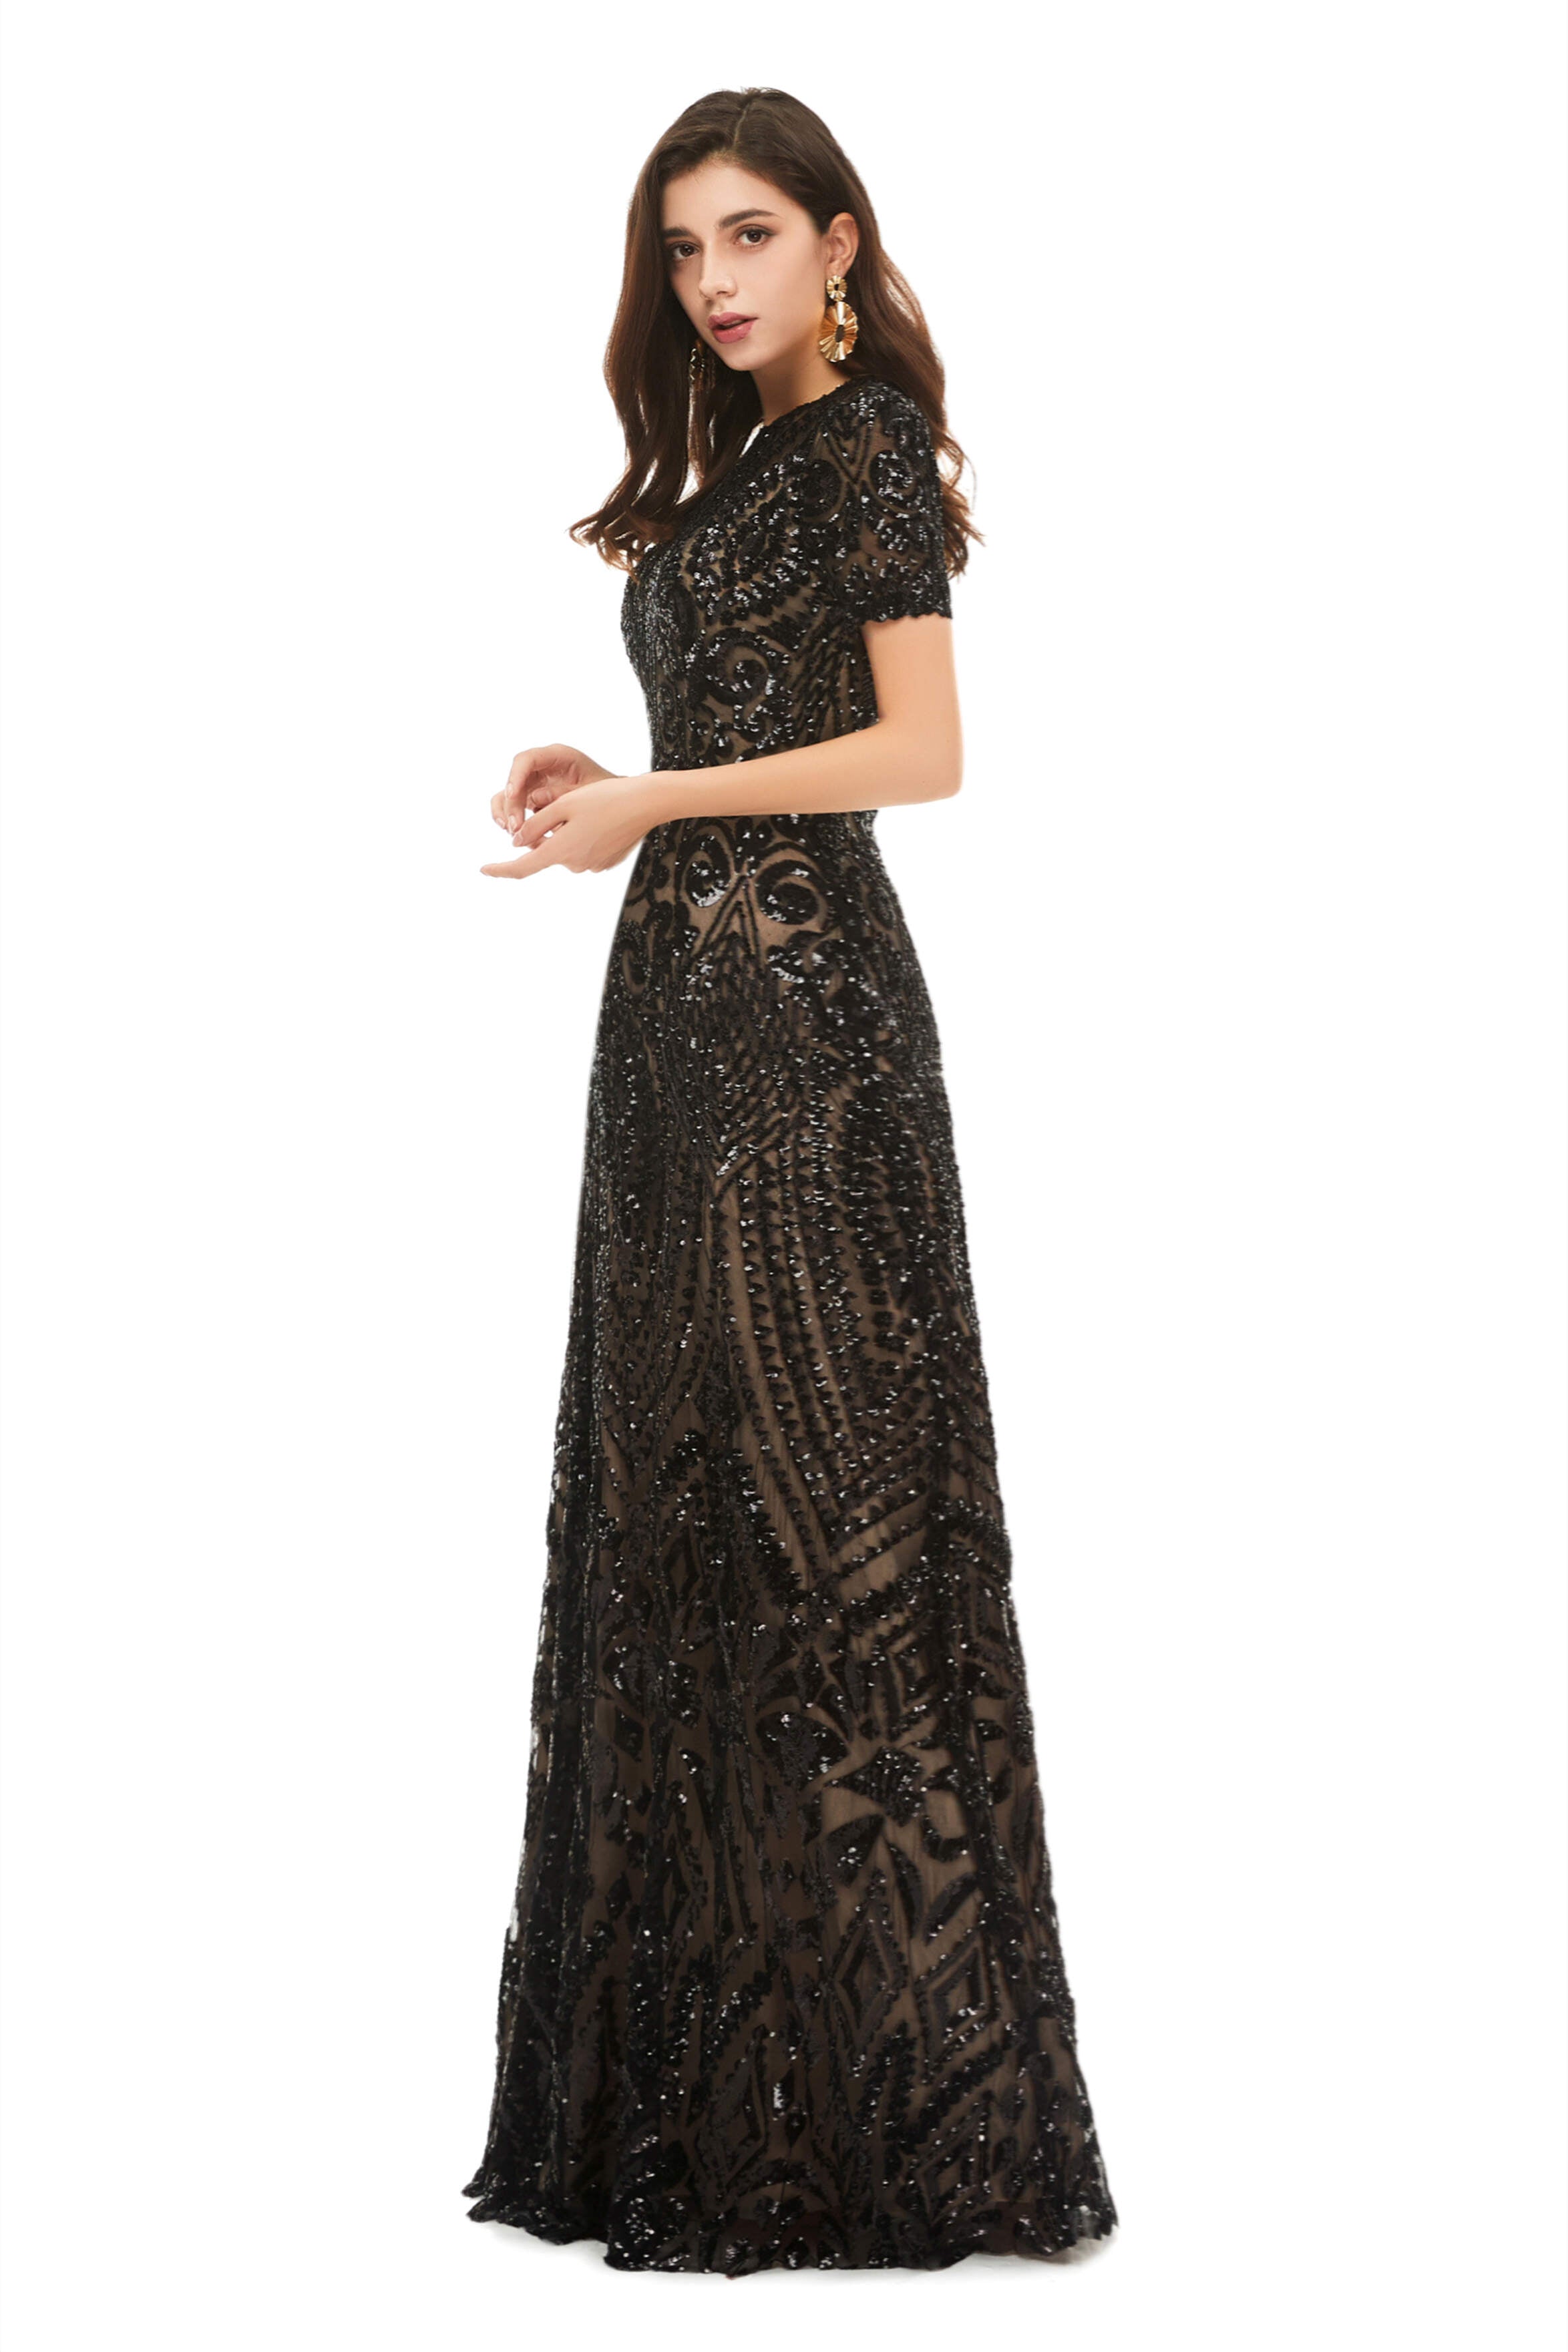 Fancy Outfit, Long Black Sparkly Sequins Prom Dresses With Short Sleeves